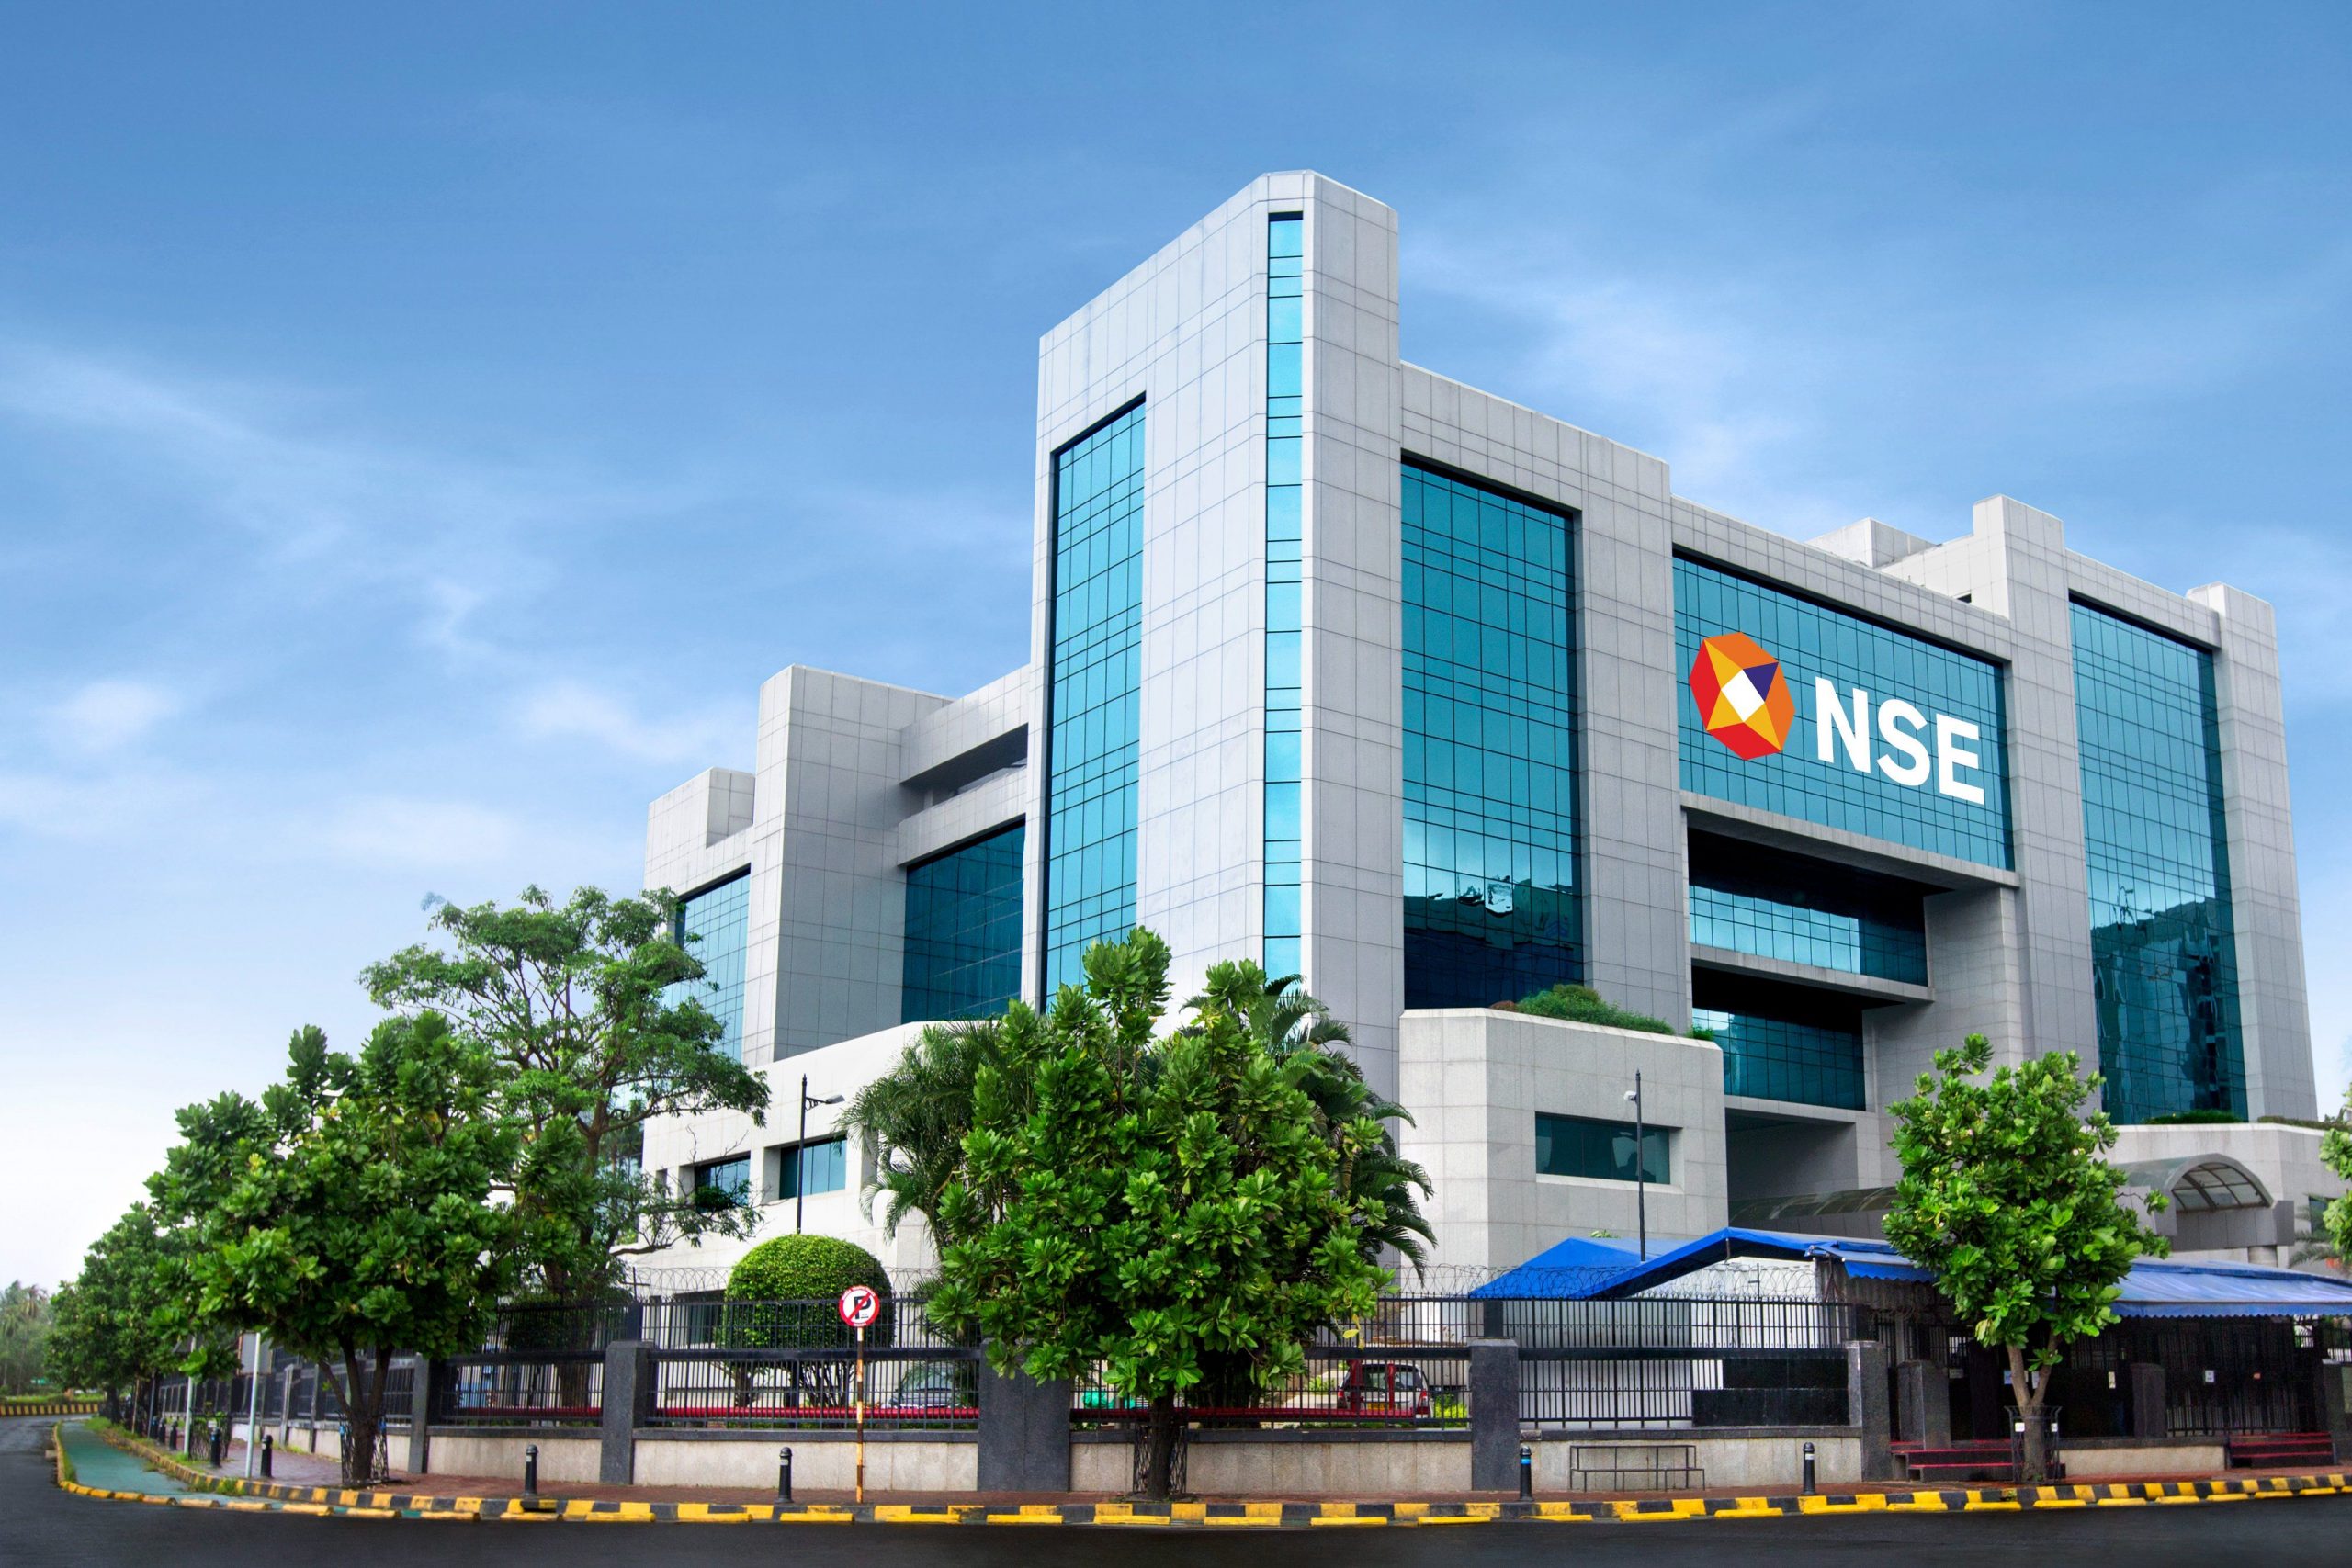 NSE F&O Ban: IEX, NMDC, SAIL, Sun Tv and others under ban today